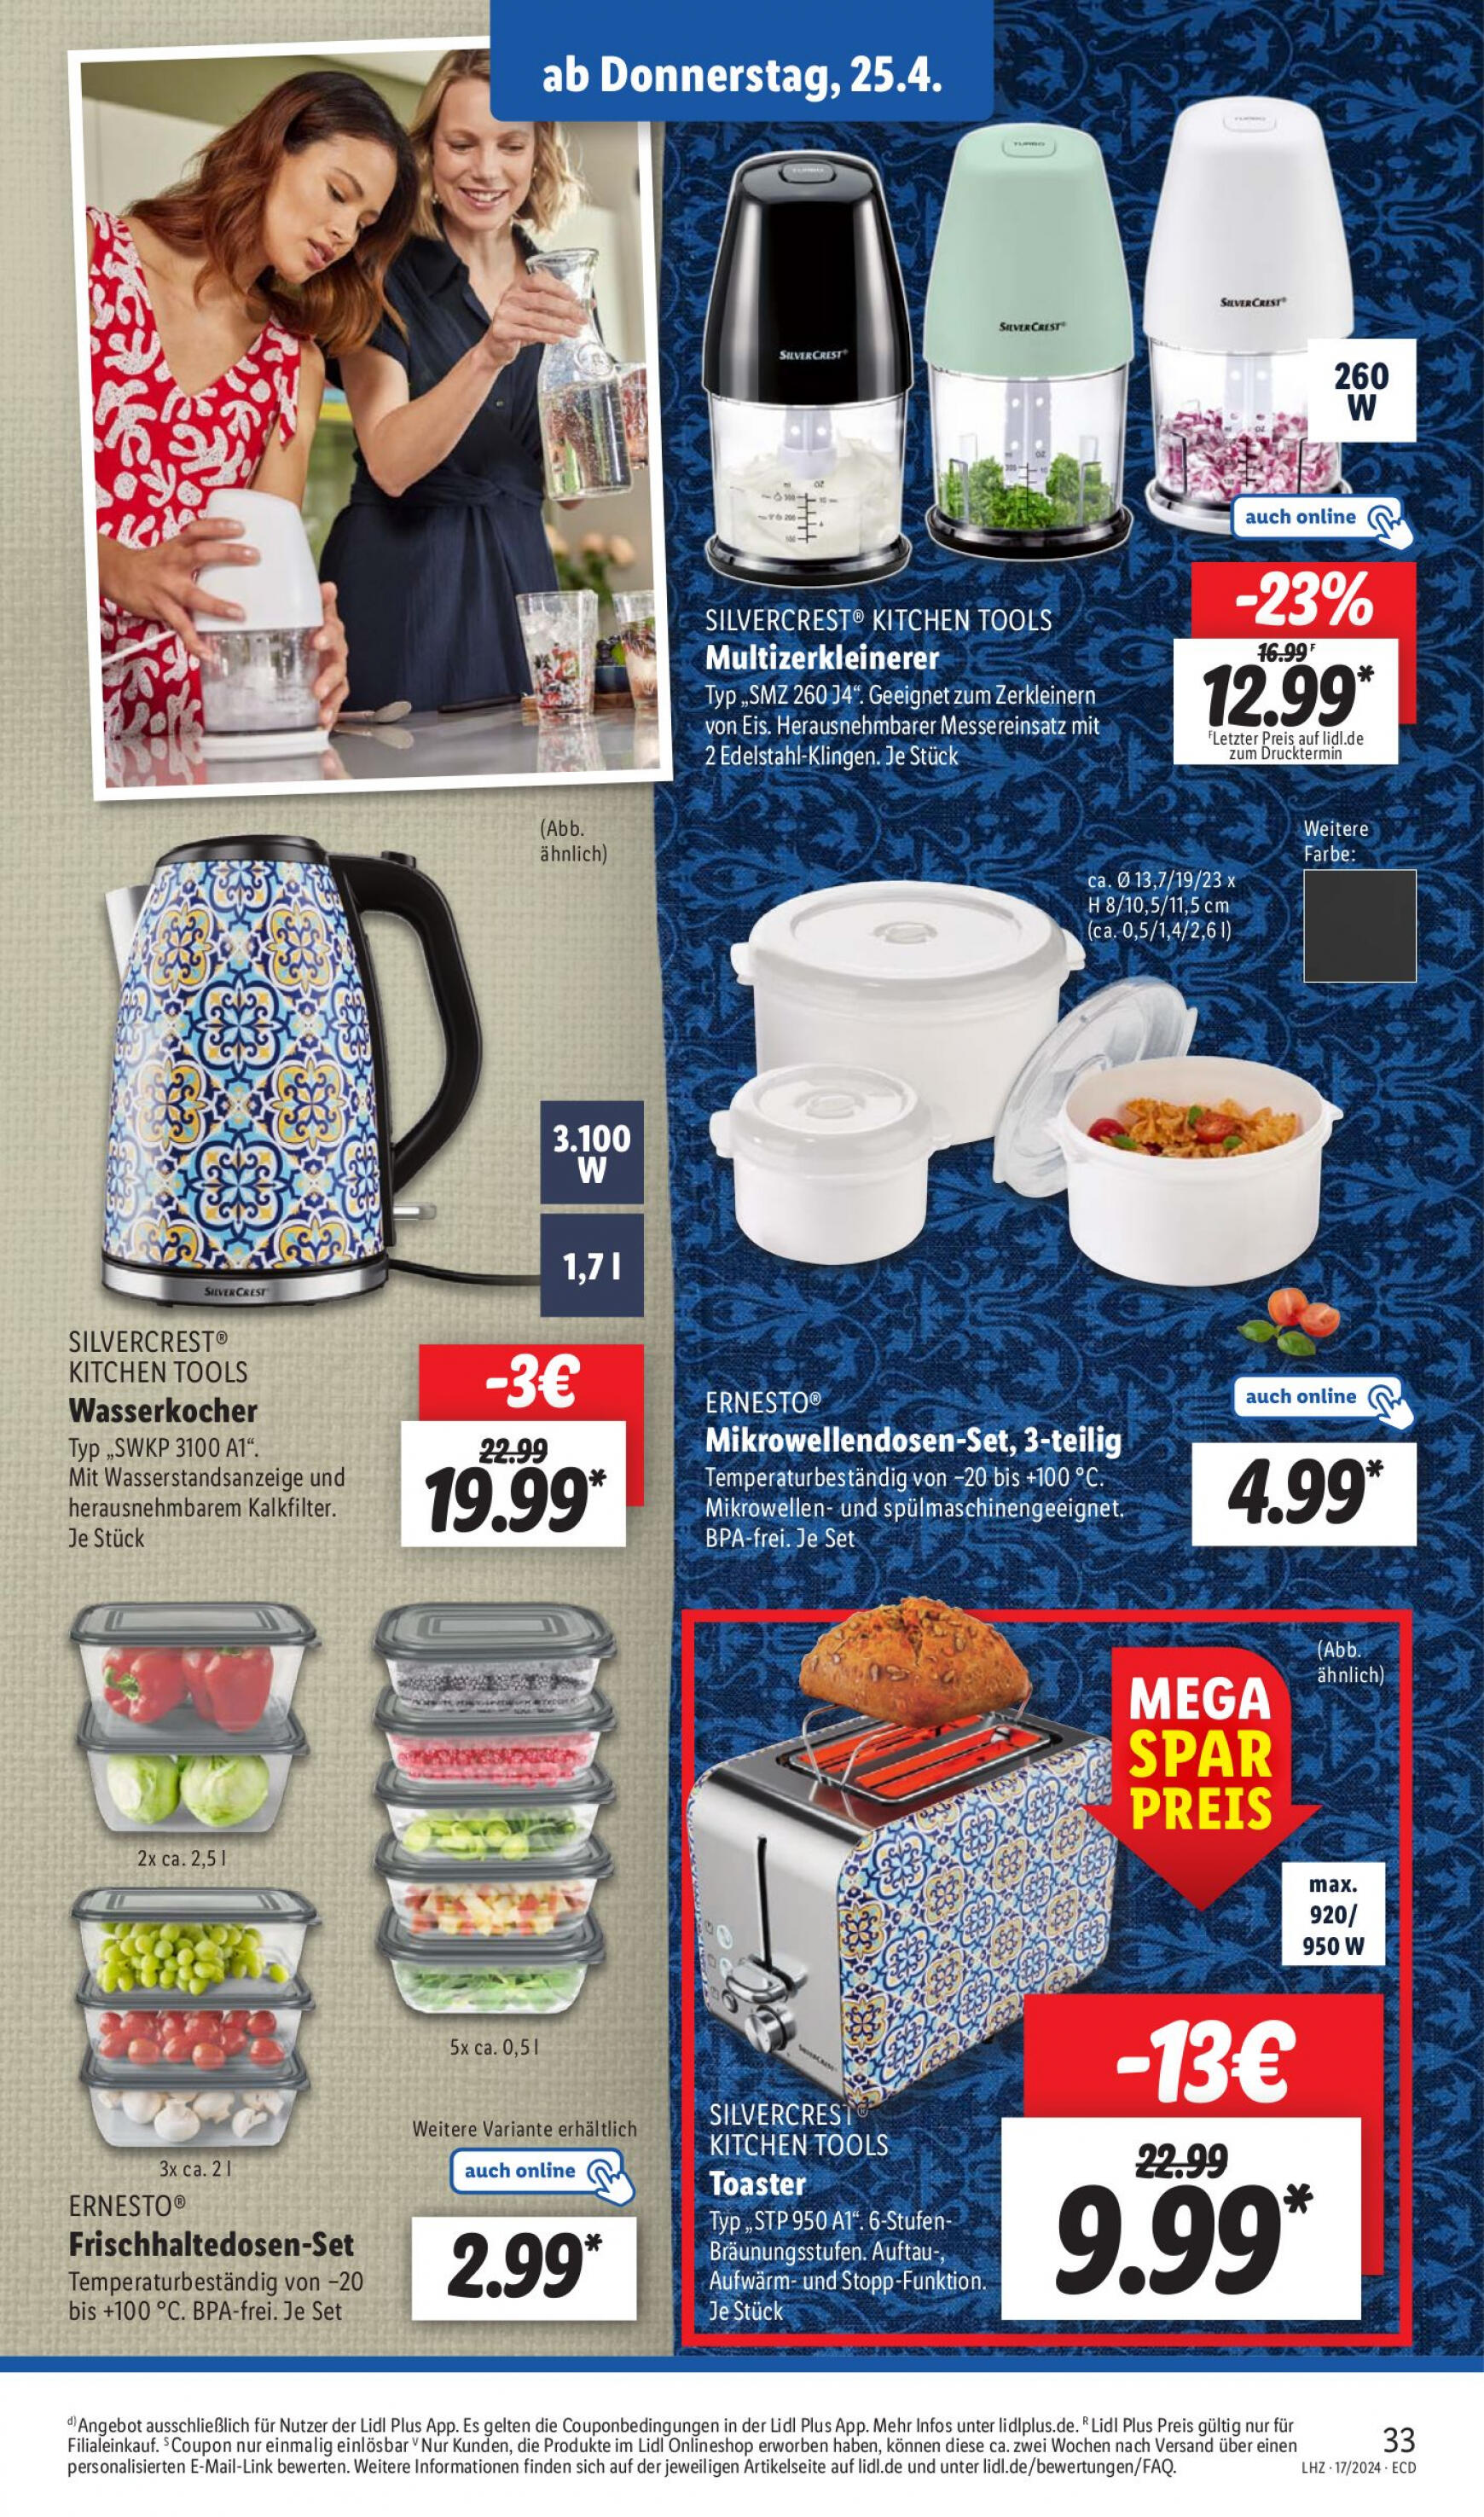 lidl - Flyer Lidl aktuell 22.04. - 27.04. - page: 39